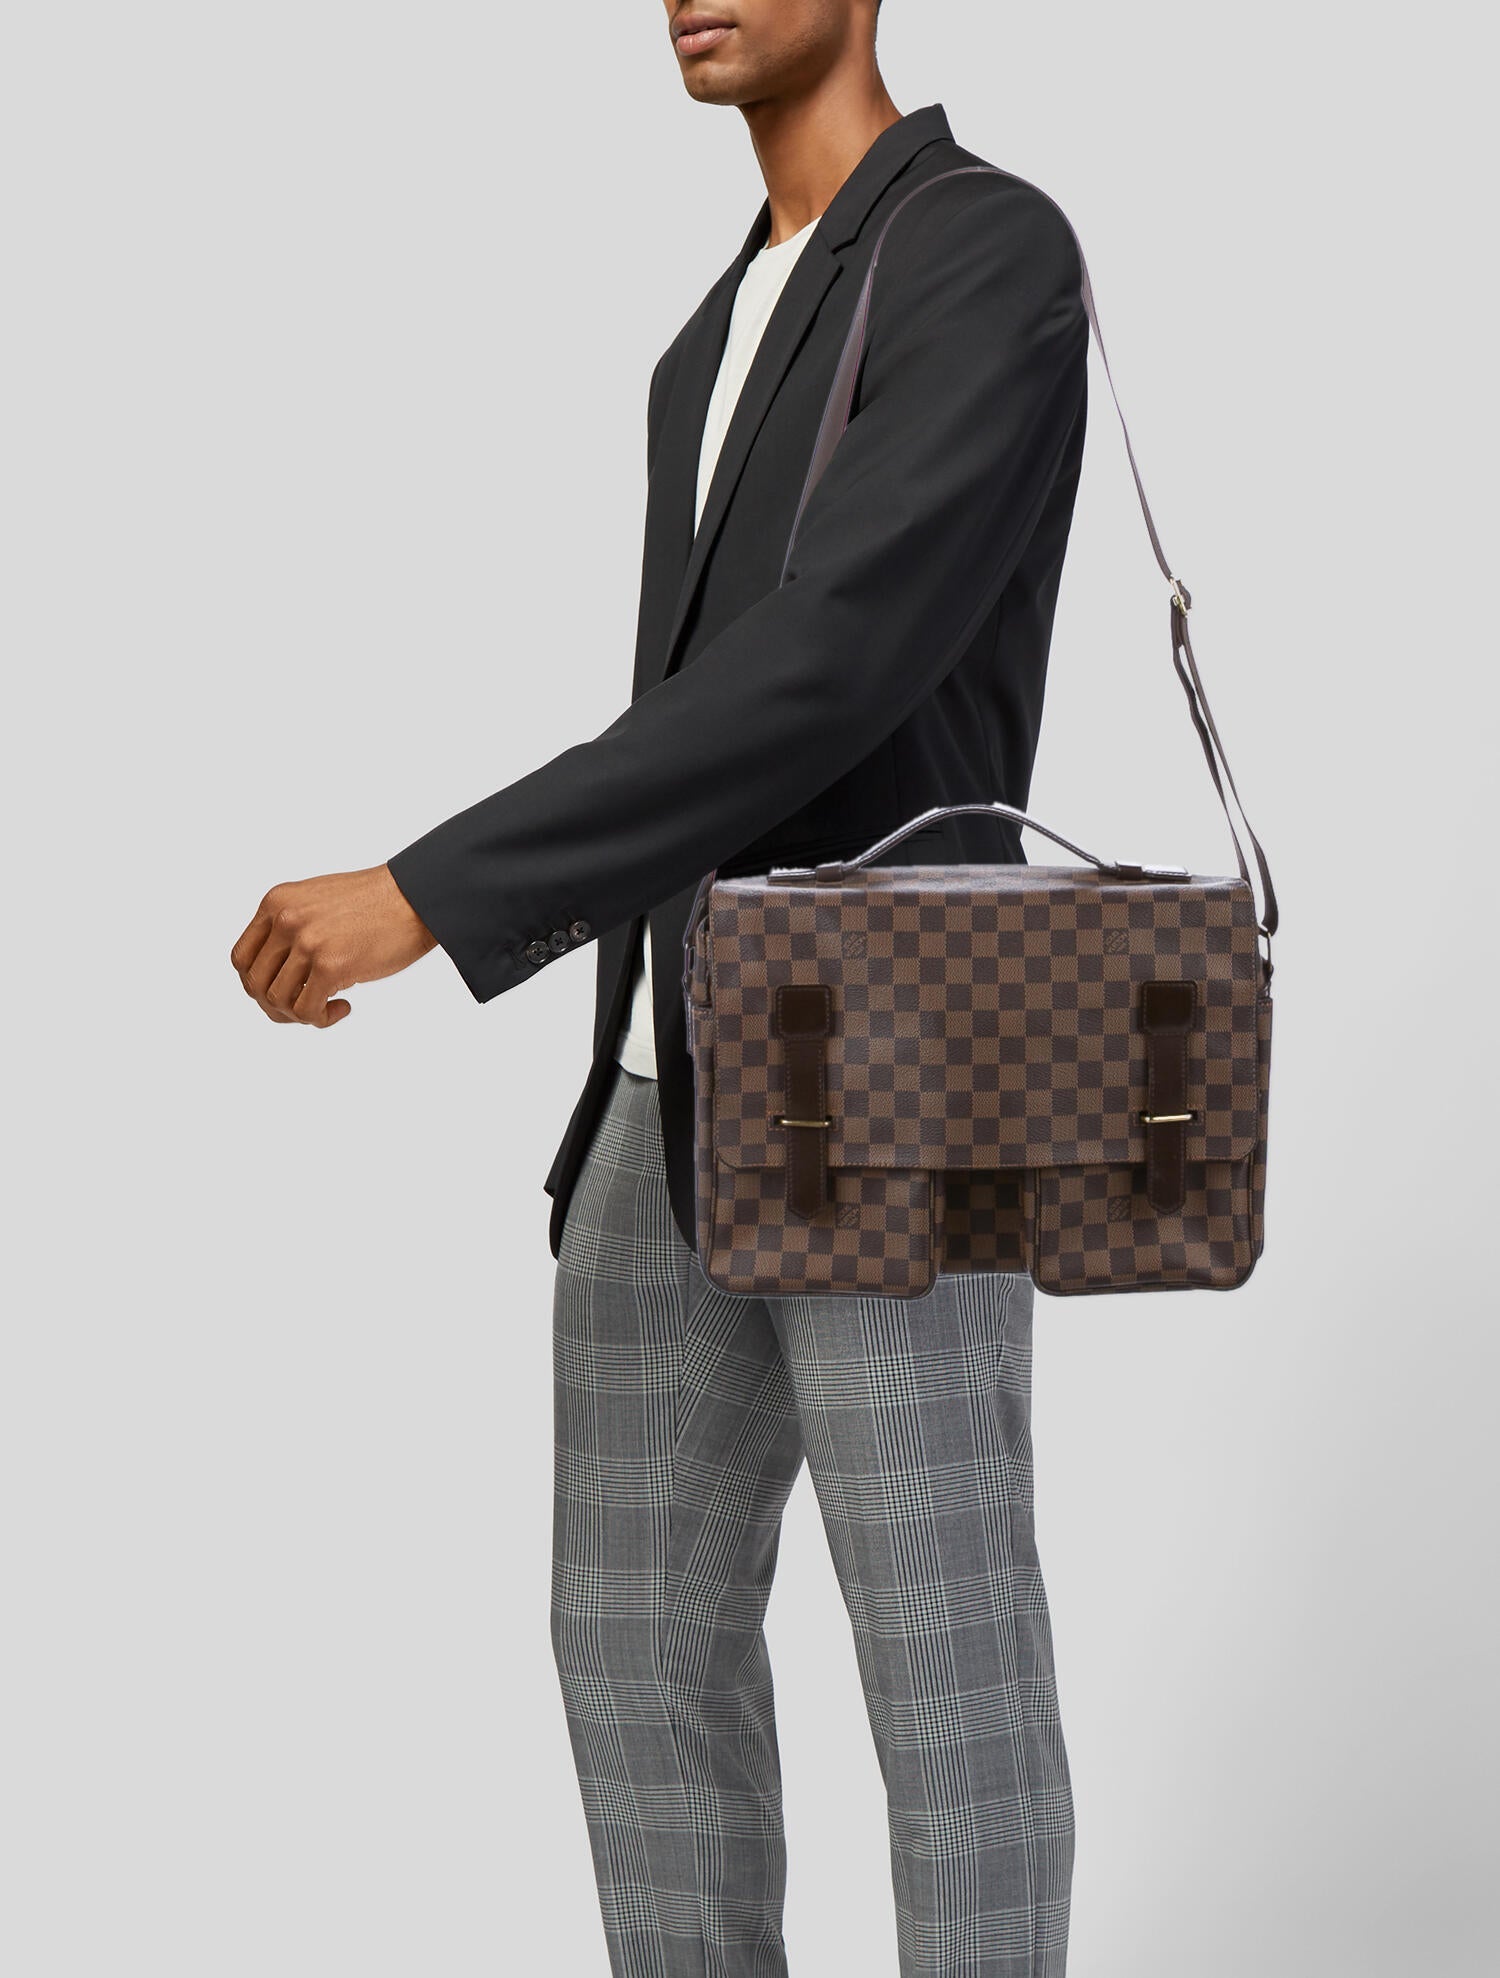 Louis Vuitton Damier Ebene Broadway Messenger Bag - Luggage & Travelling  Accessories - Costume & Dressing Accessories